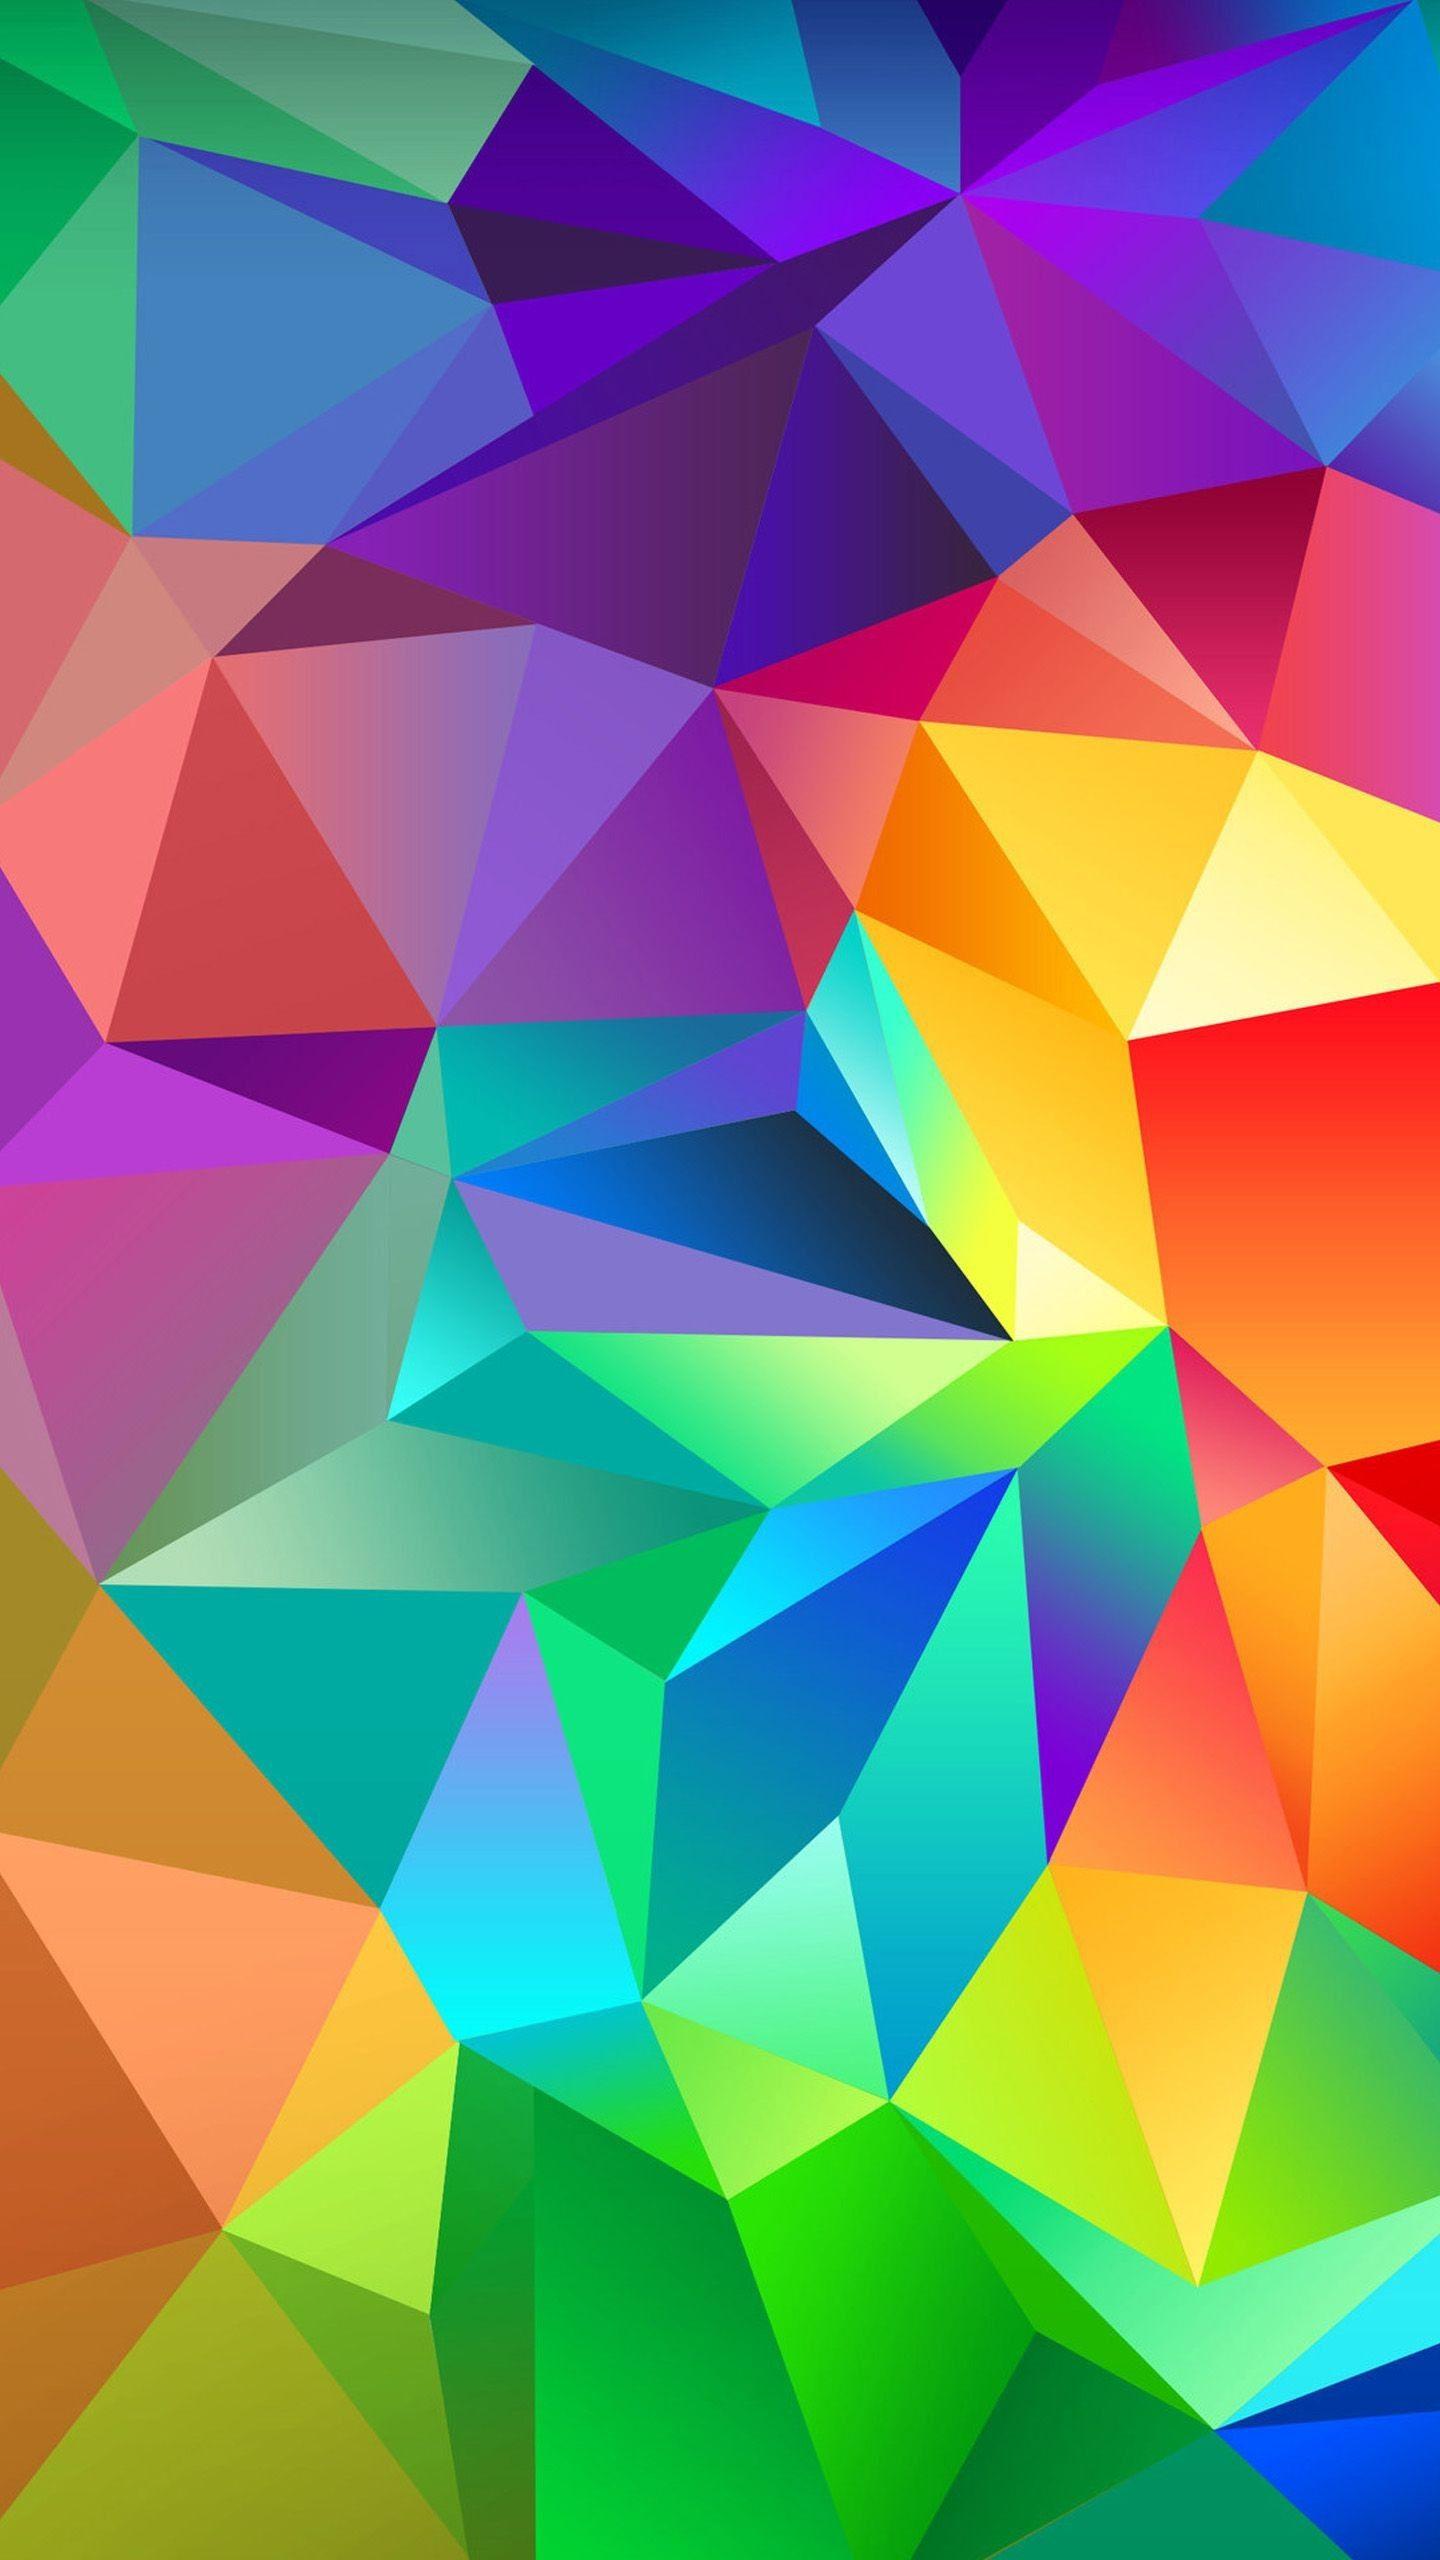 Multicolored Abstract Artwork Free Image Wallpaper